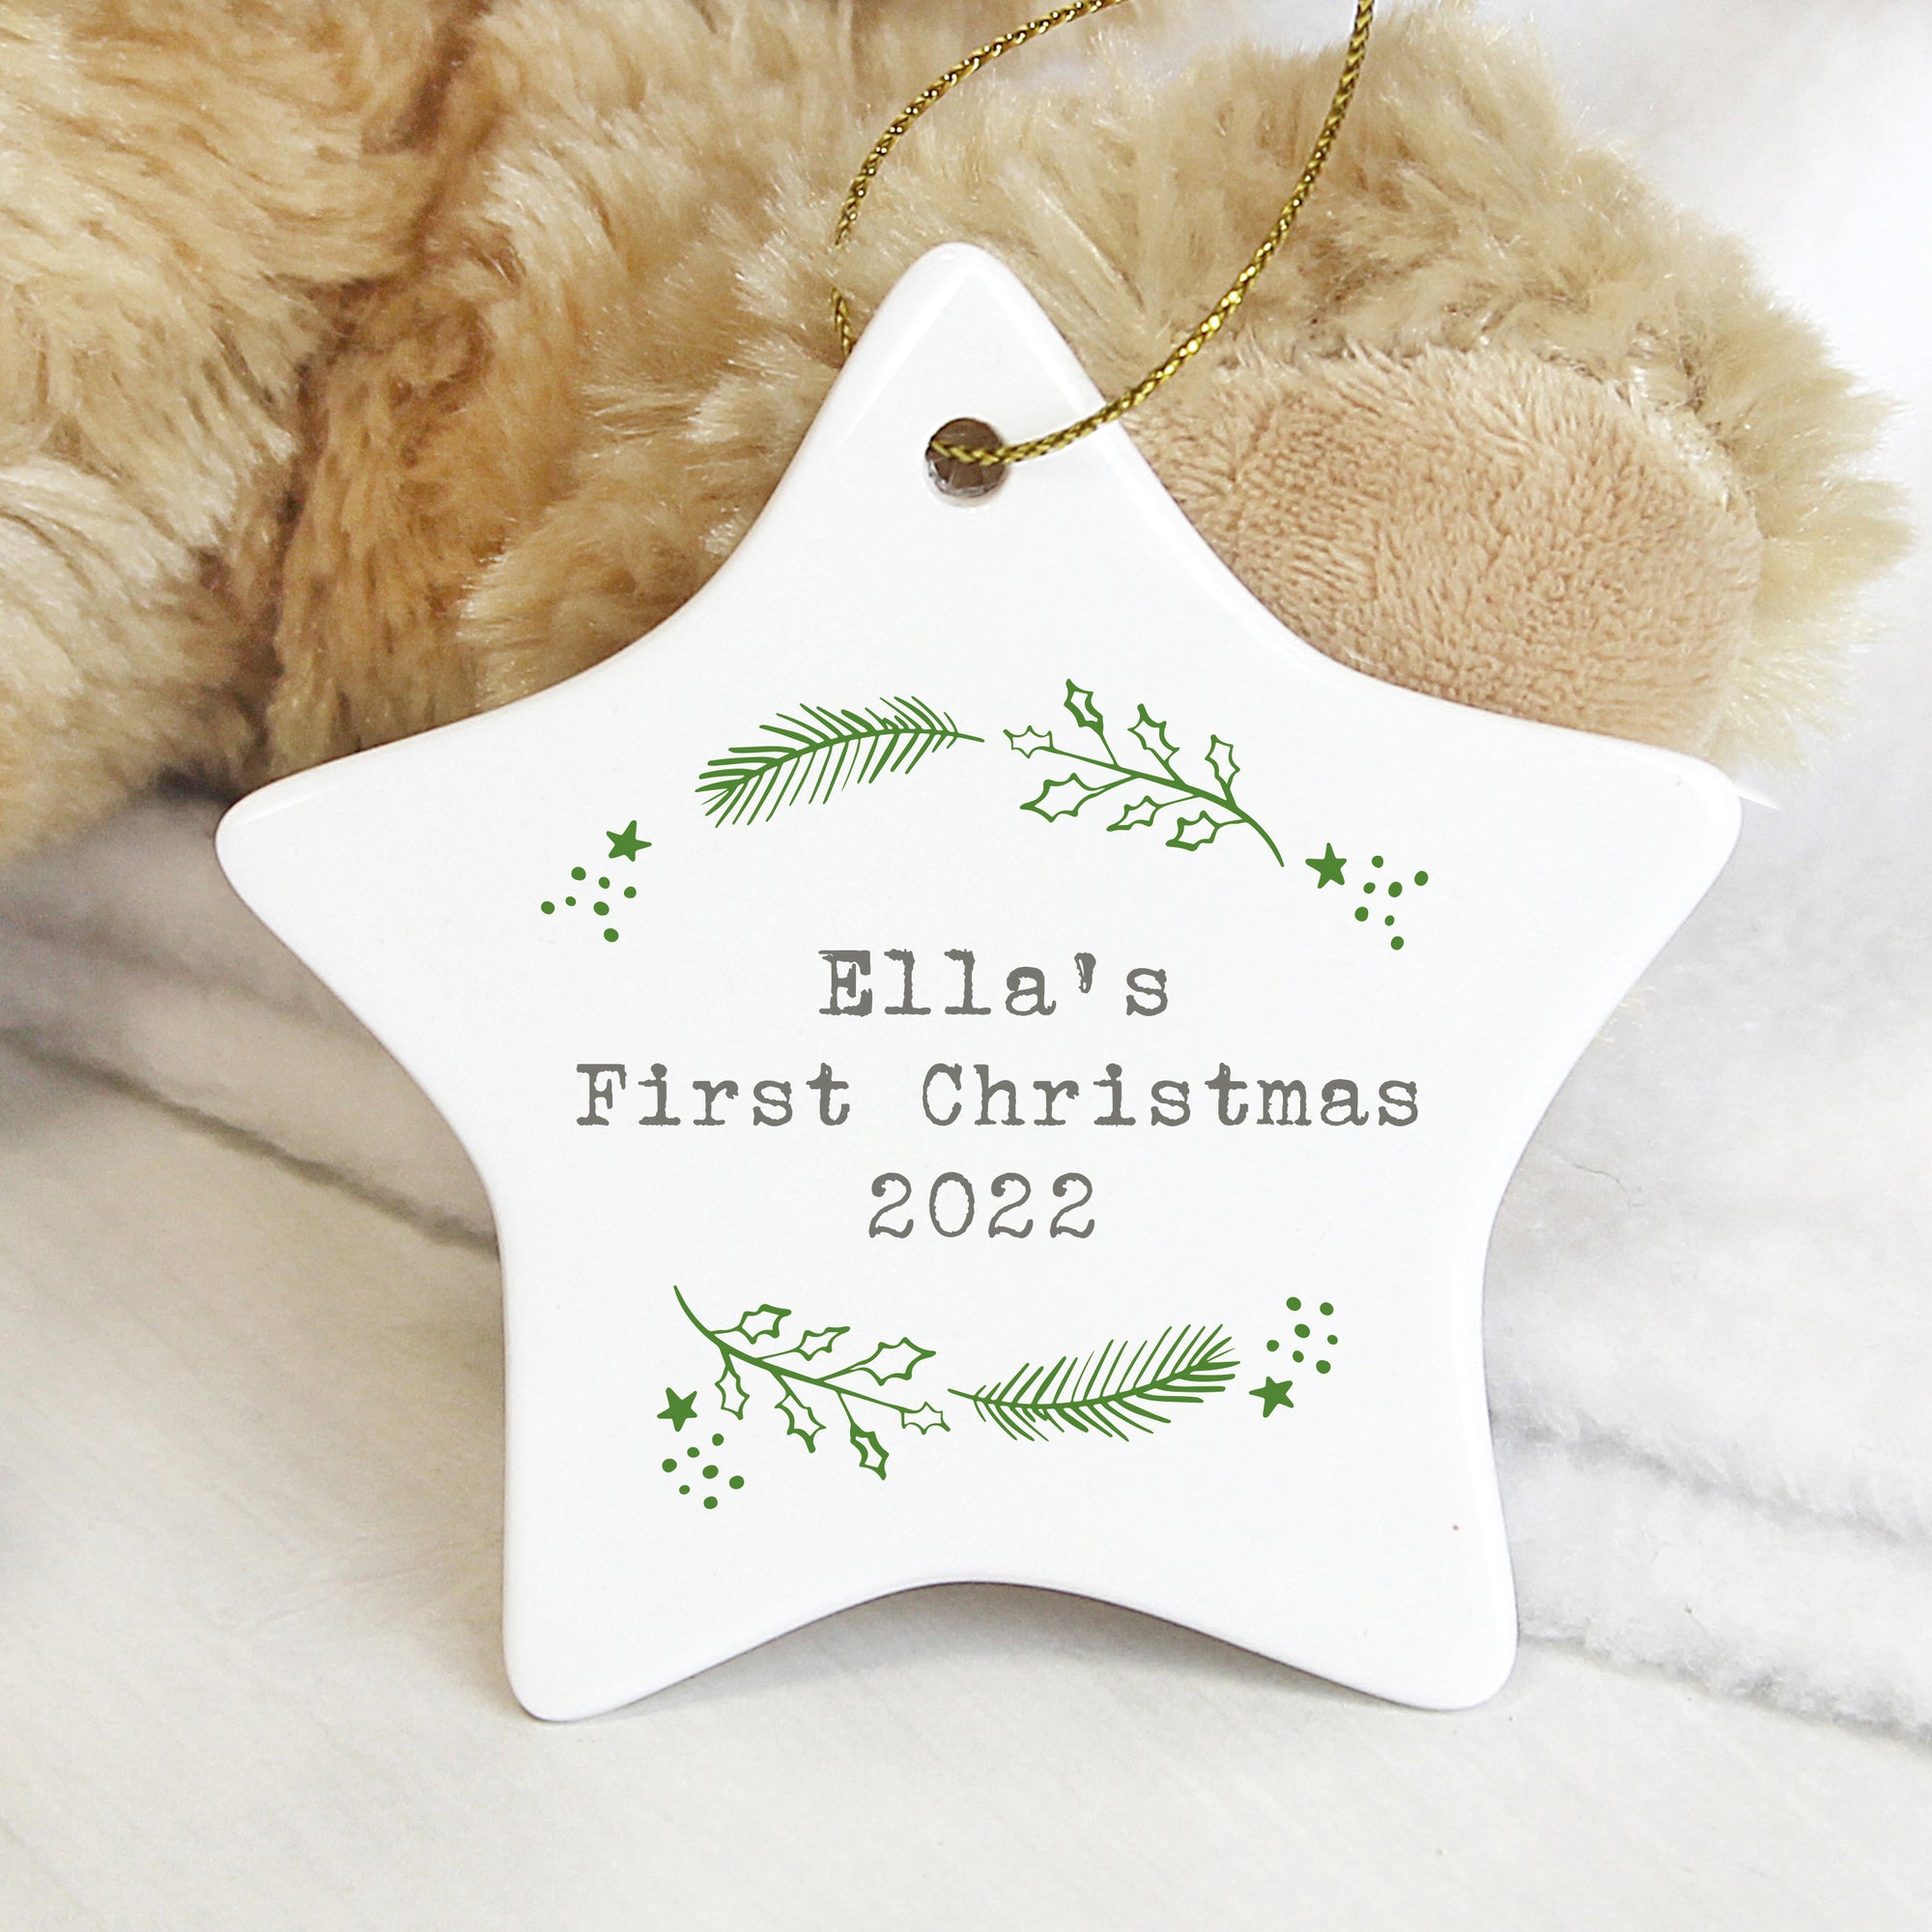 Image of a white ceramic star Christmas decoration which can be personalised with your own text or message over up to 3 lines. The star features a green holly and Christmas fir branch design and the personalisation will be printed in the centre of the star in a grey type writer effect font. The star comes with a string to hang it from.